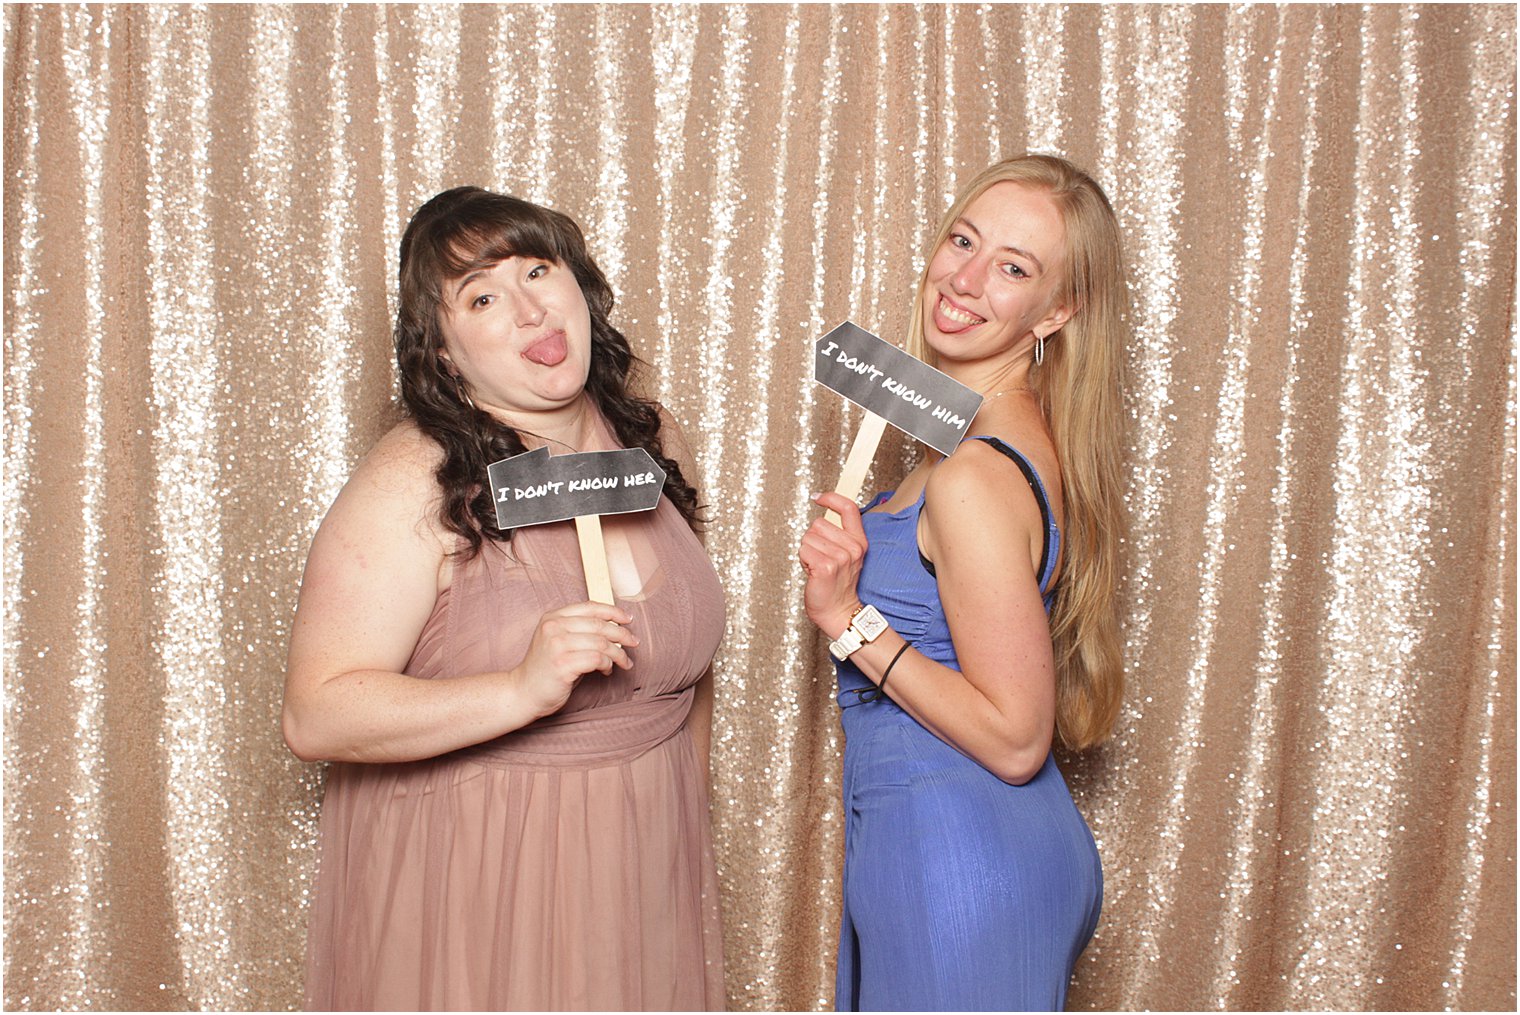 women laugh together holding signs in photo booth